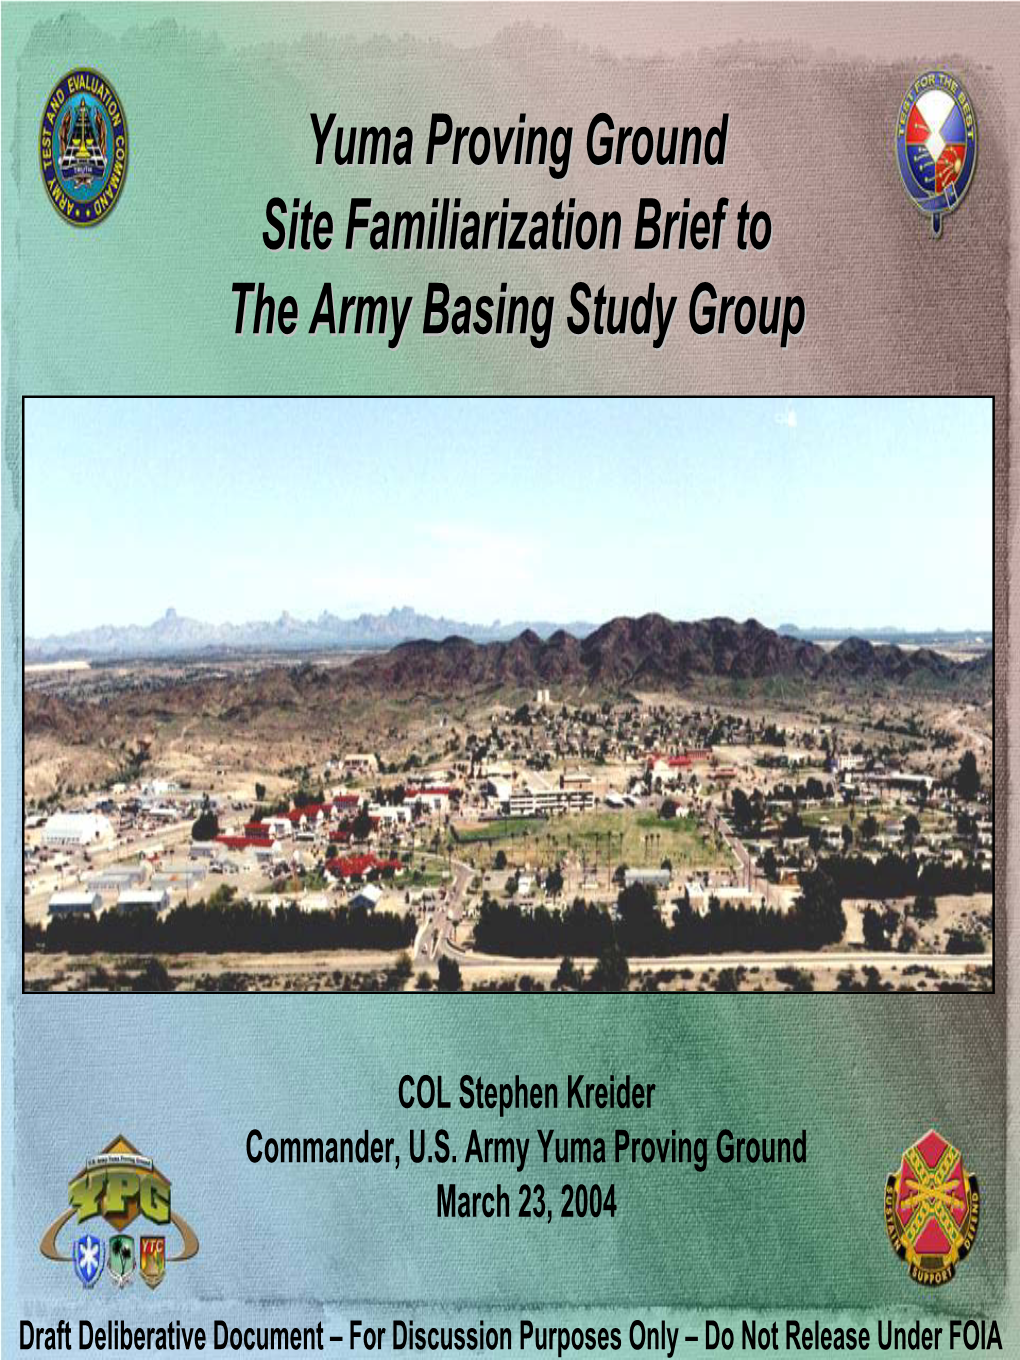 Yuma Proving Ground Site Familiarization Brief to the Army